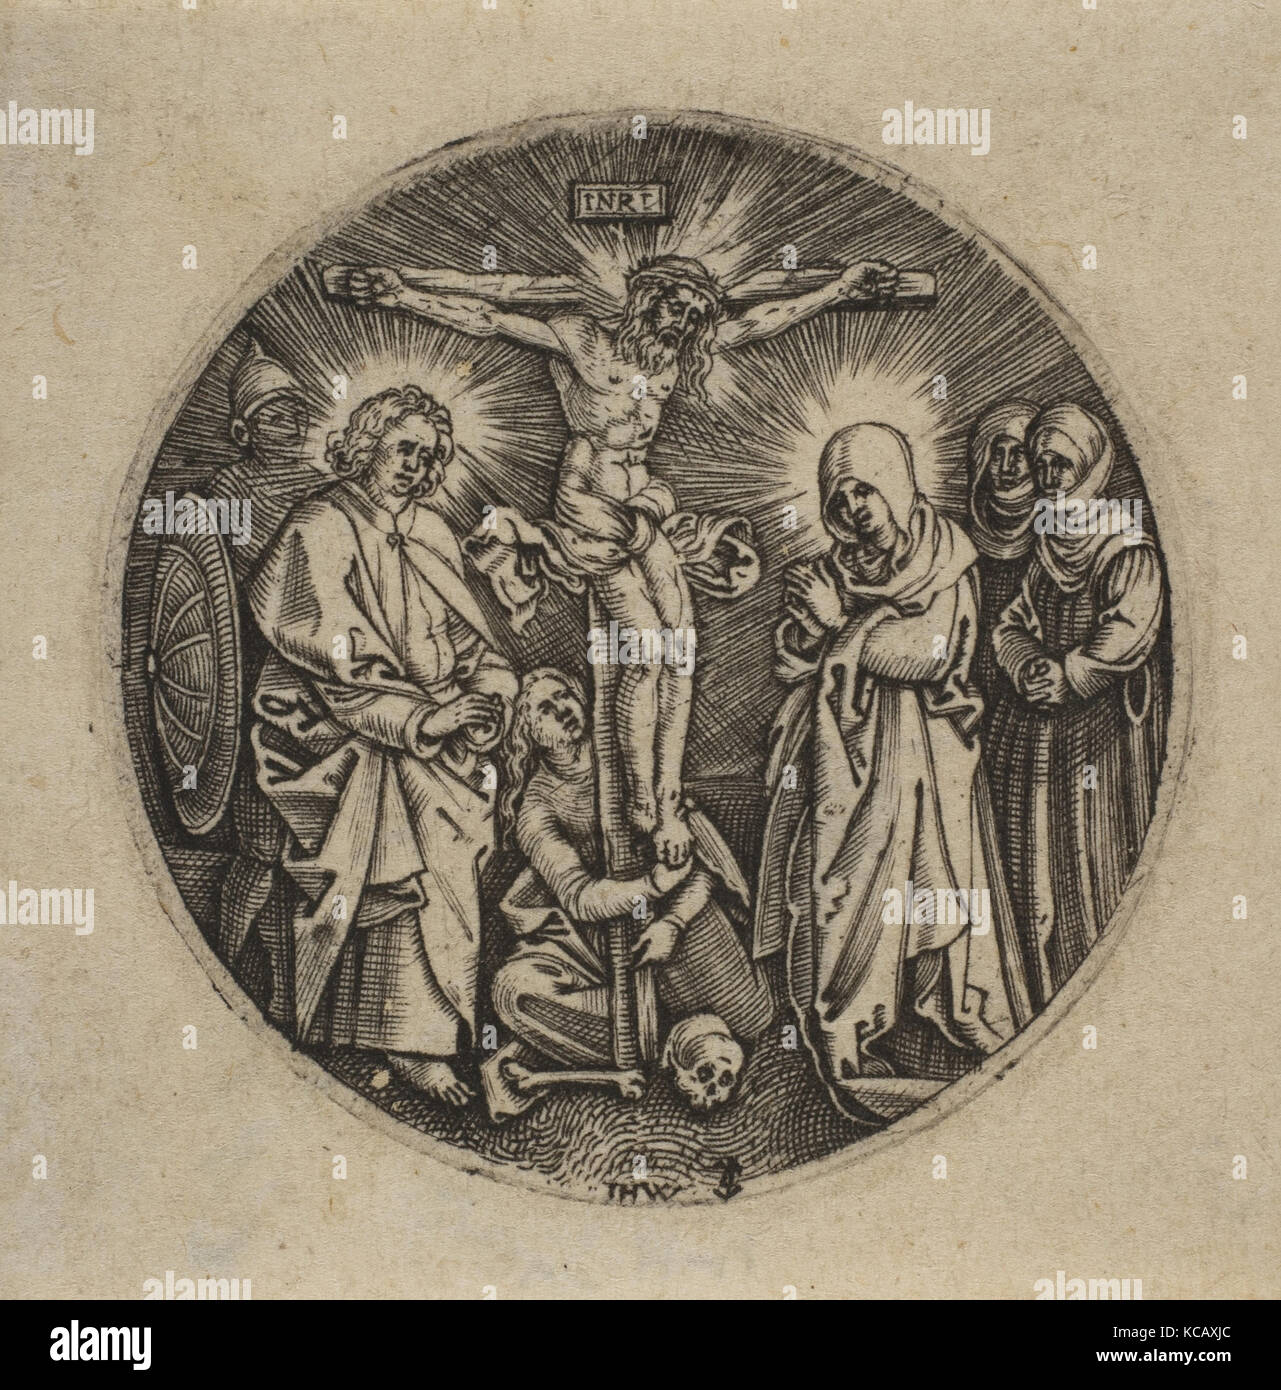 The Crucifixion (Round) (copy), n.d., Engraving, Sheet: 1 3/4 × 1 3/4 in. (4.5 × 4.5 cm), Prints, Jan (Johannes) Wierix Stock Photo